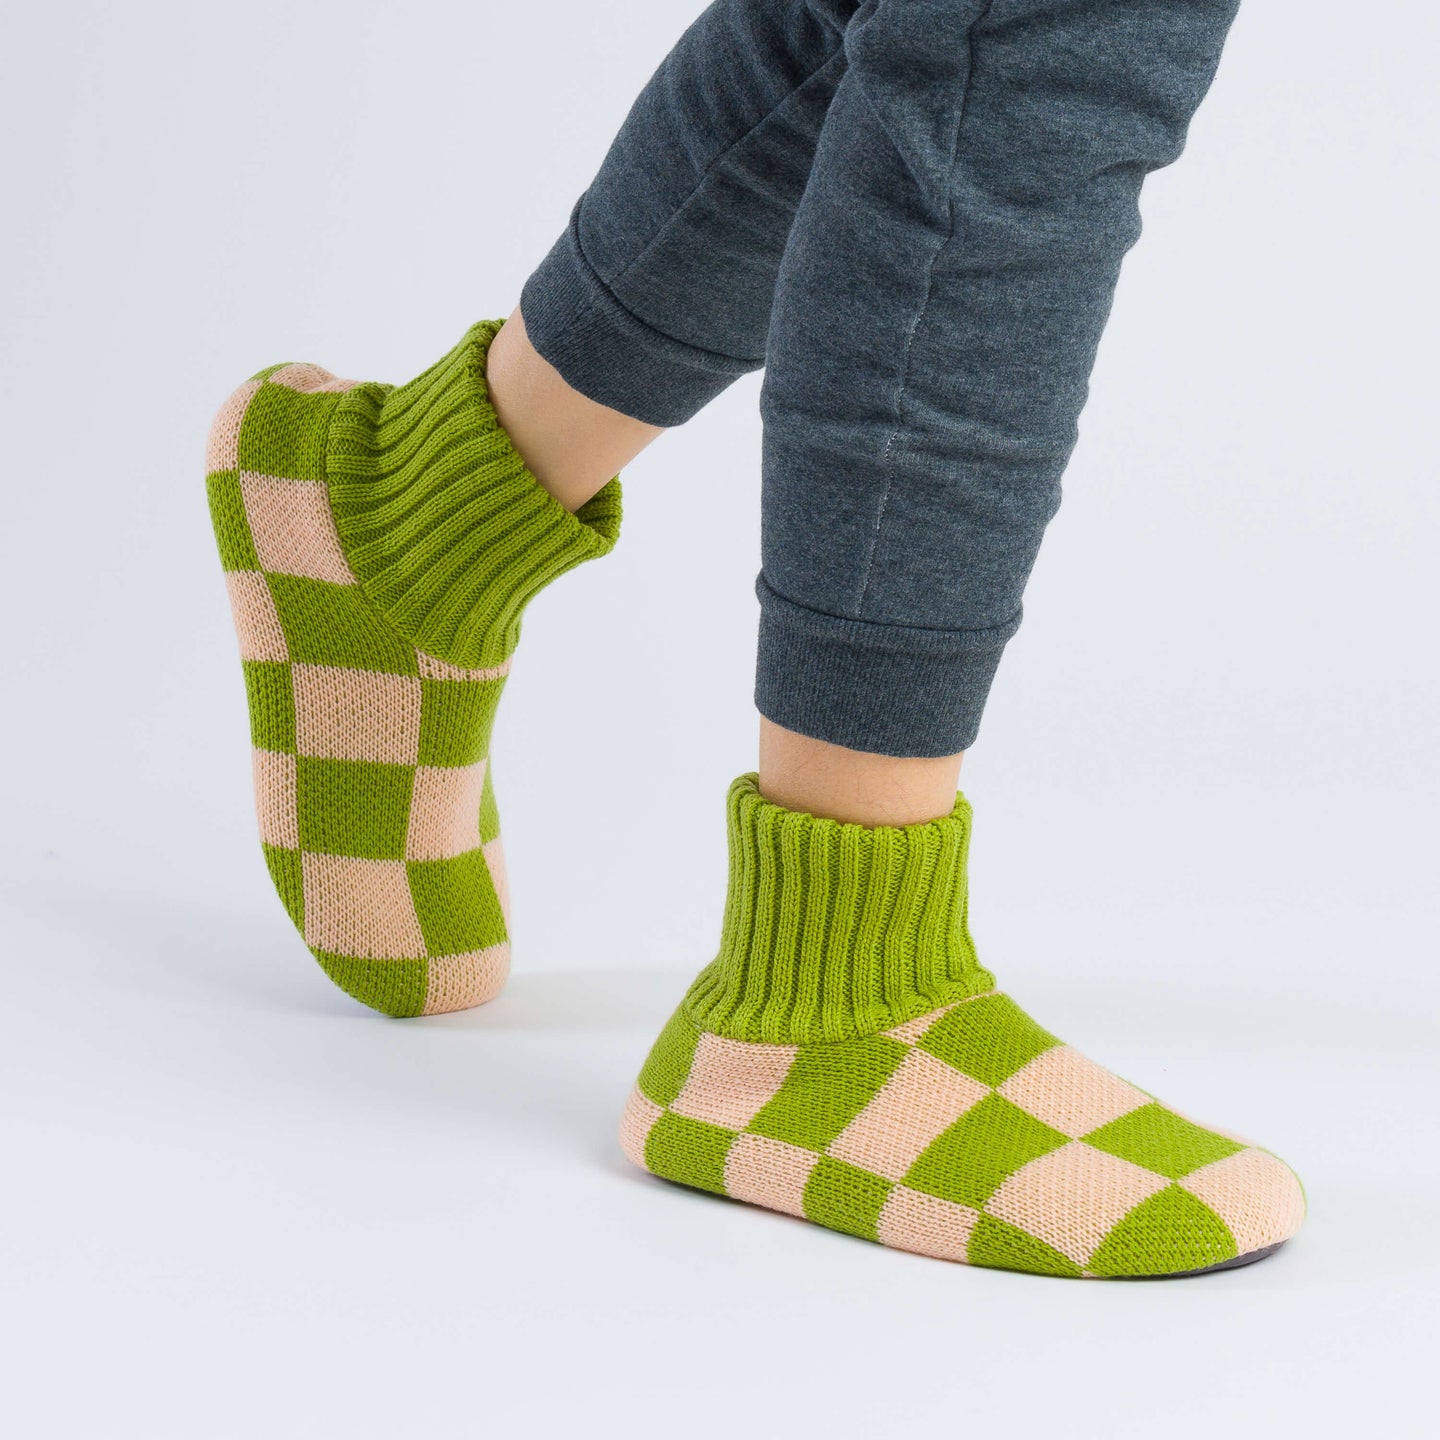 Checkerboard Knitted Sock Slippers Knit